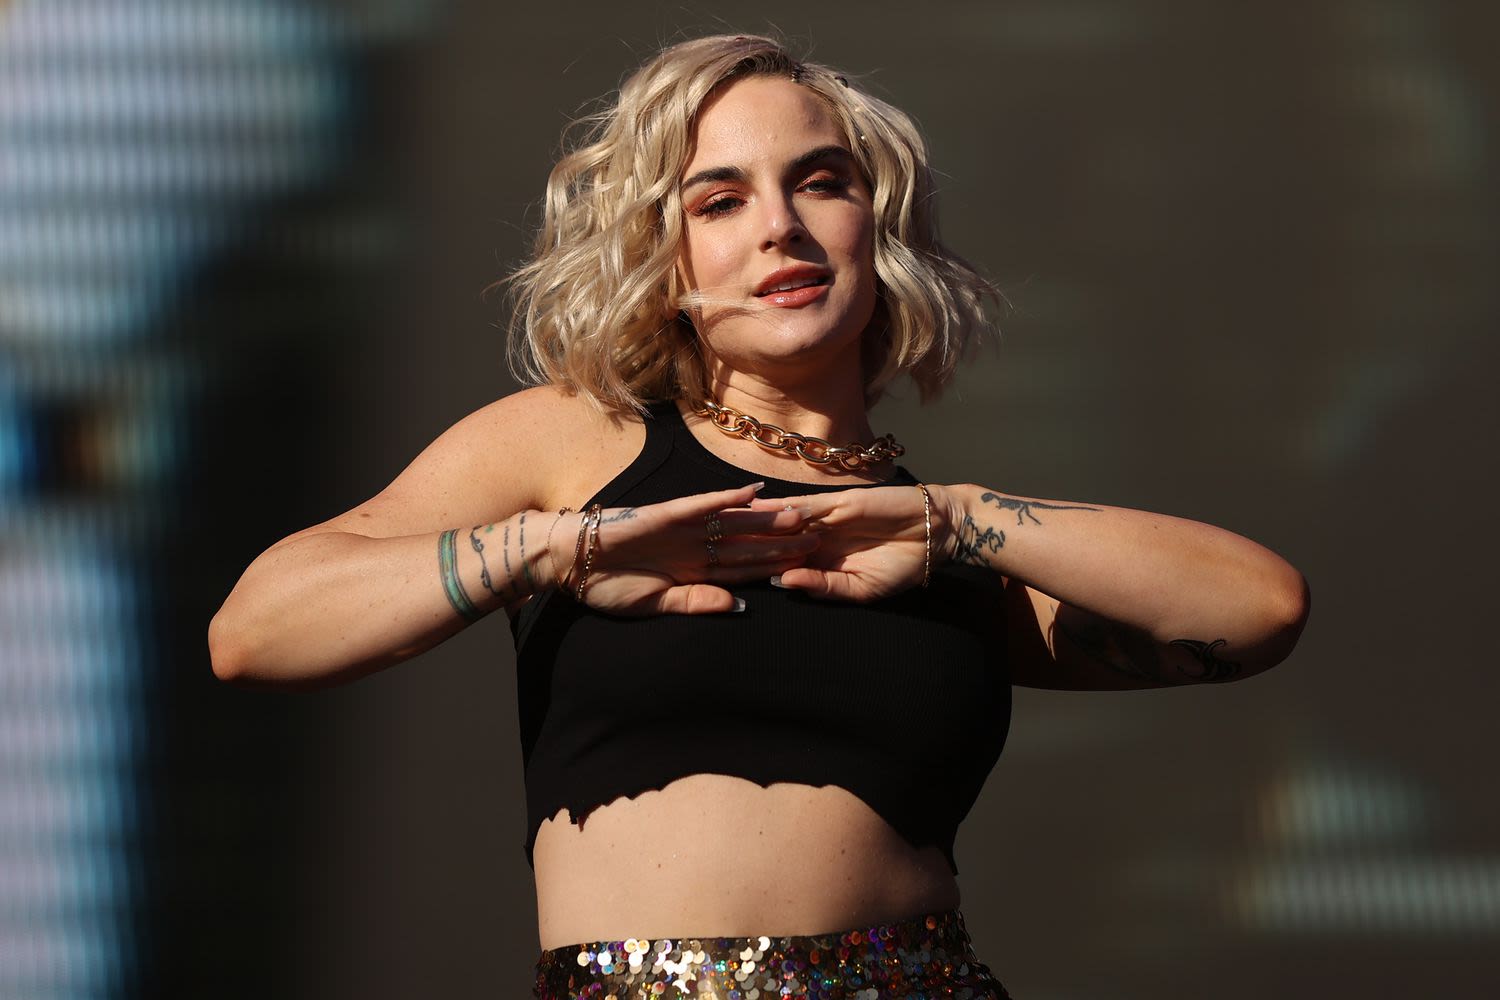 JoJo Announces 'Raw' Memoir 'Over the Influence' About Young Fame, 'Addiction, Generational Trauma' and More